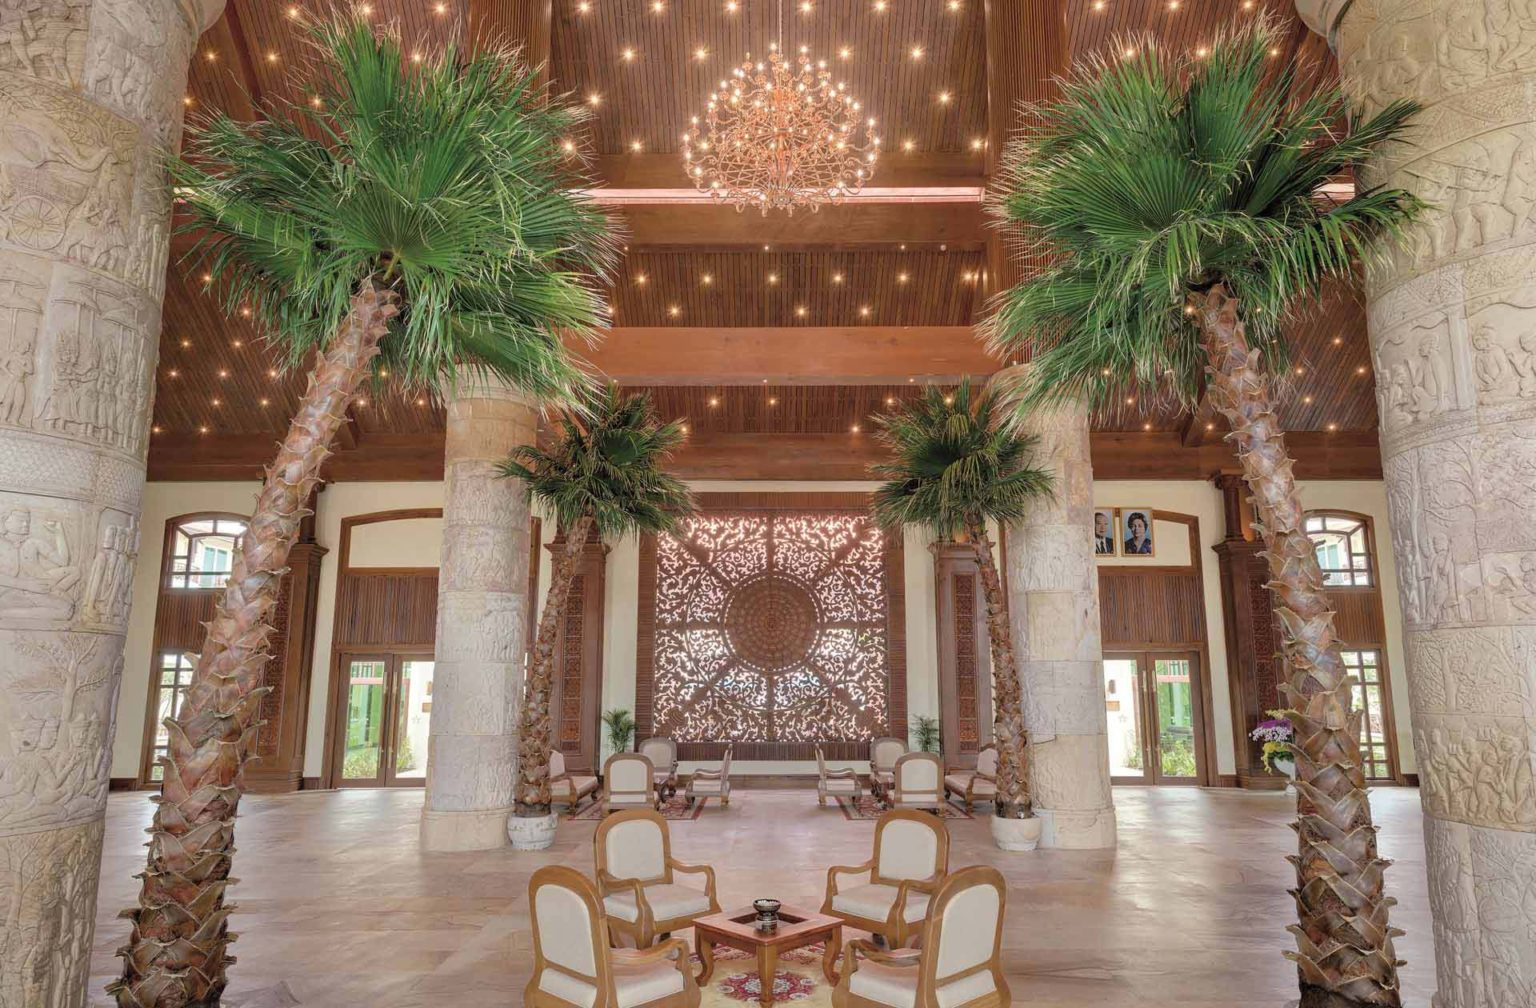 Sokha Siem Reap Resort lobby with high ceilings, seating areas and palm trees